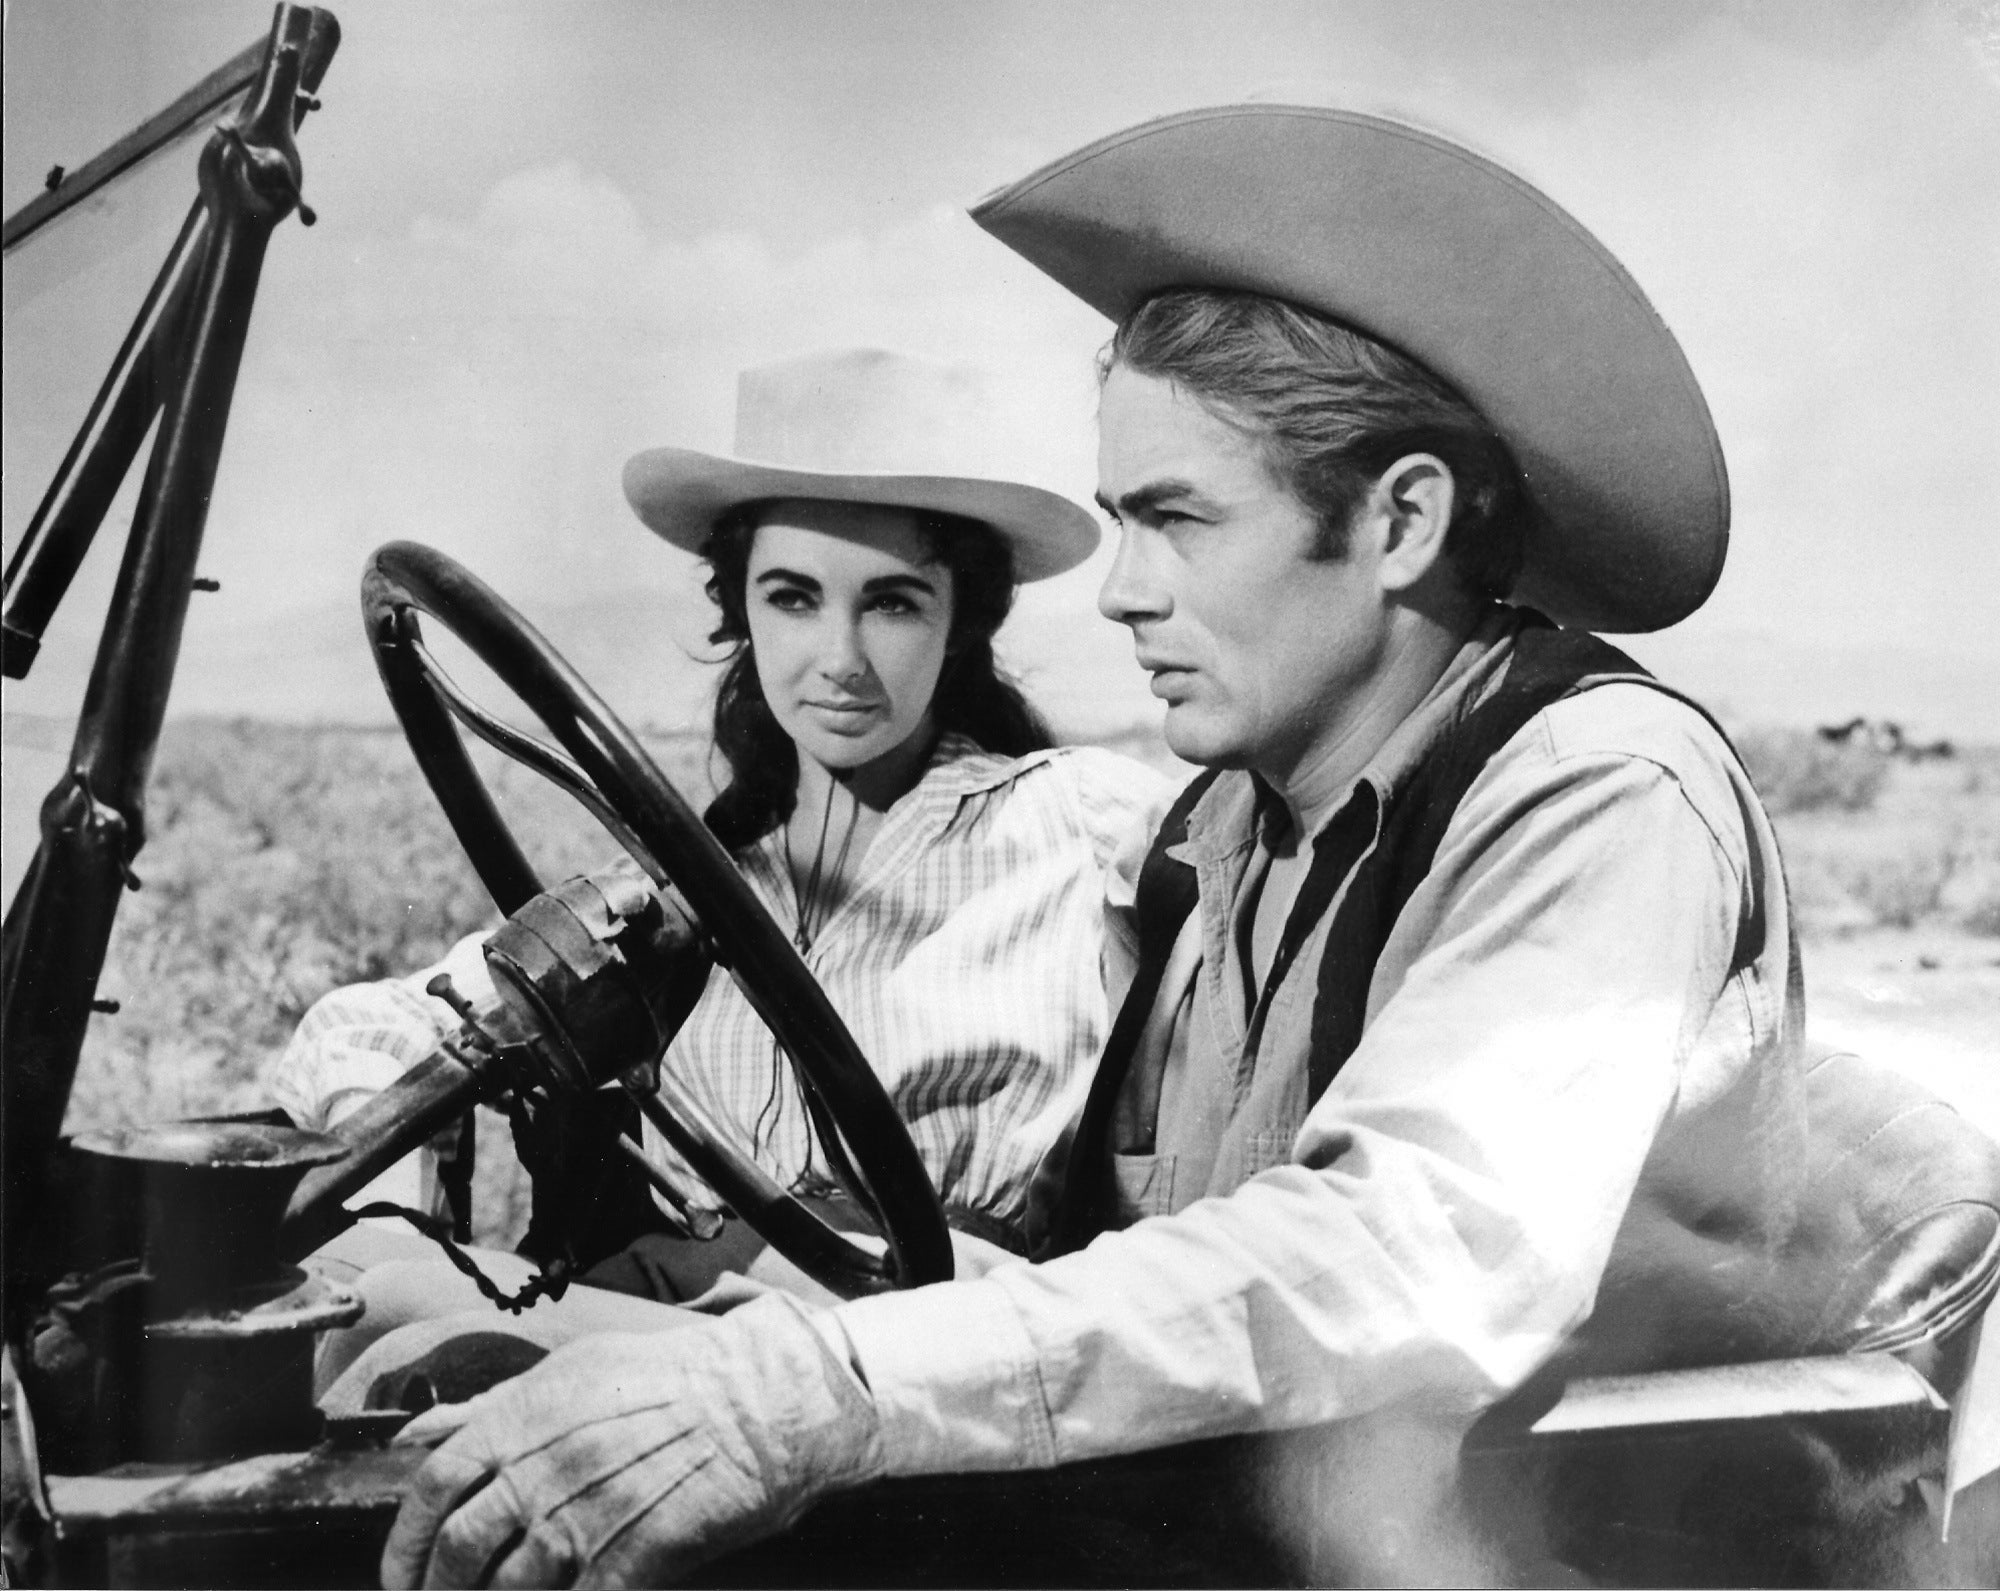 James Dean and Elizabeth Taylor in the 1956 film 'Giant'